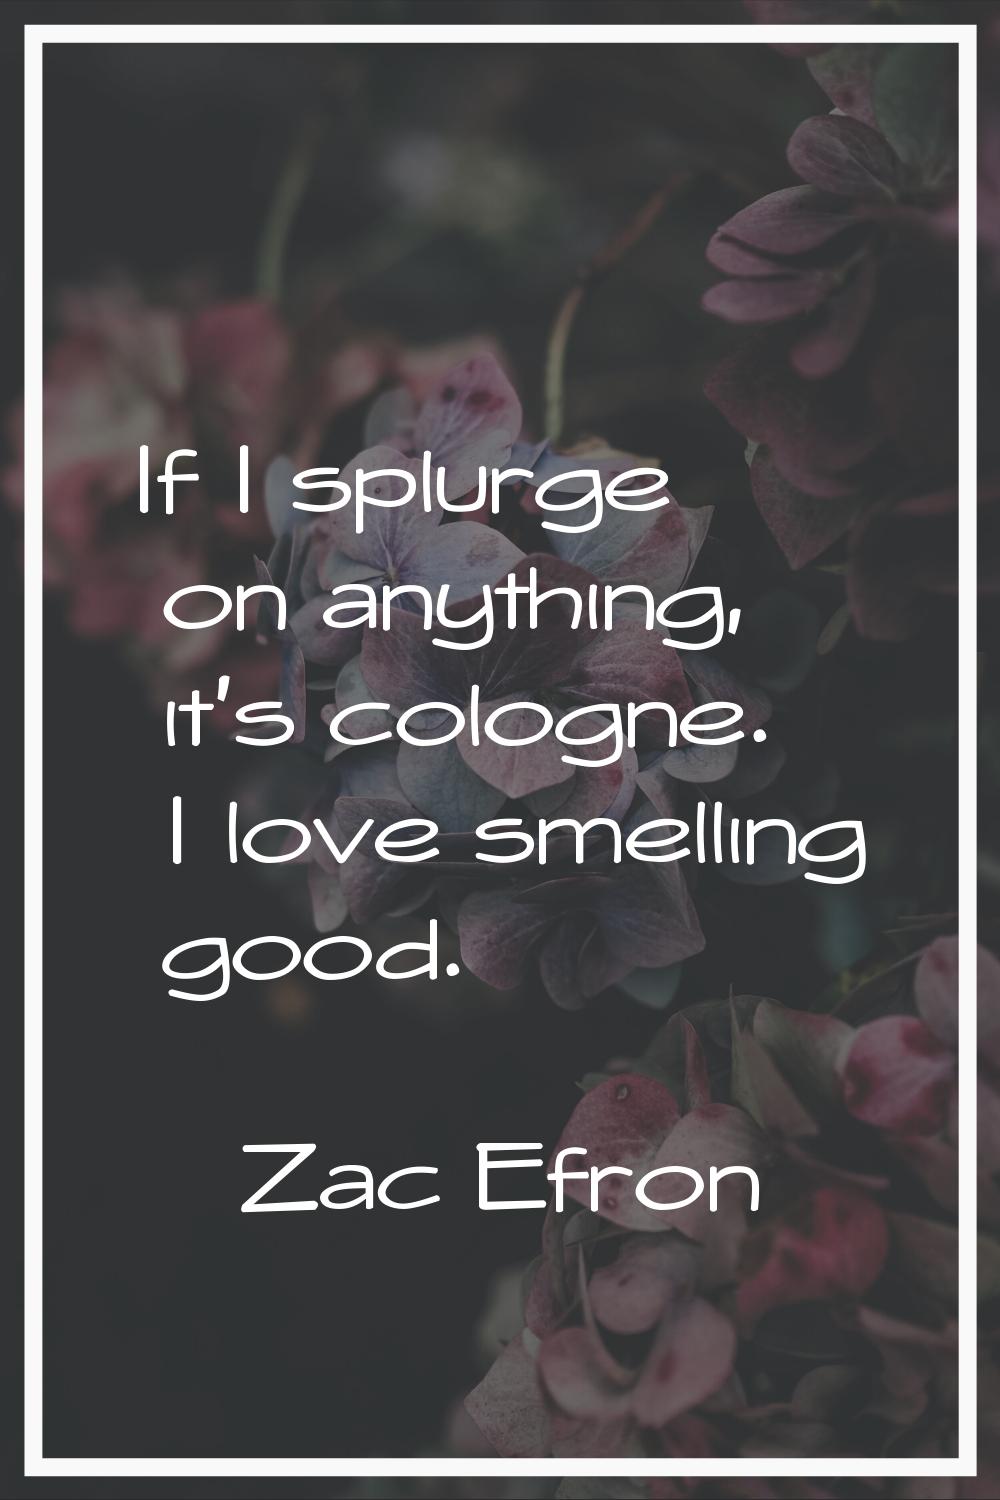 If I splurge on anything, it's cologne. I love smelling good.